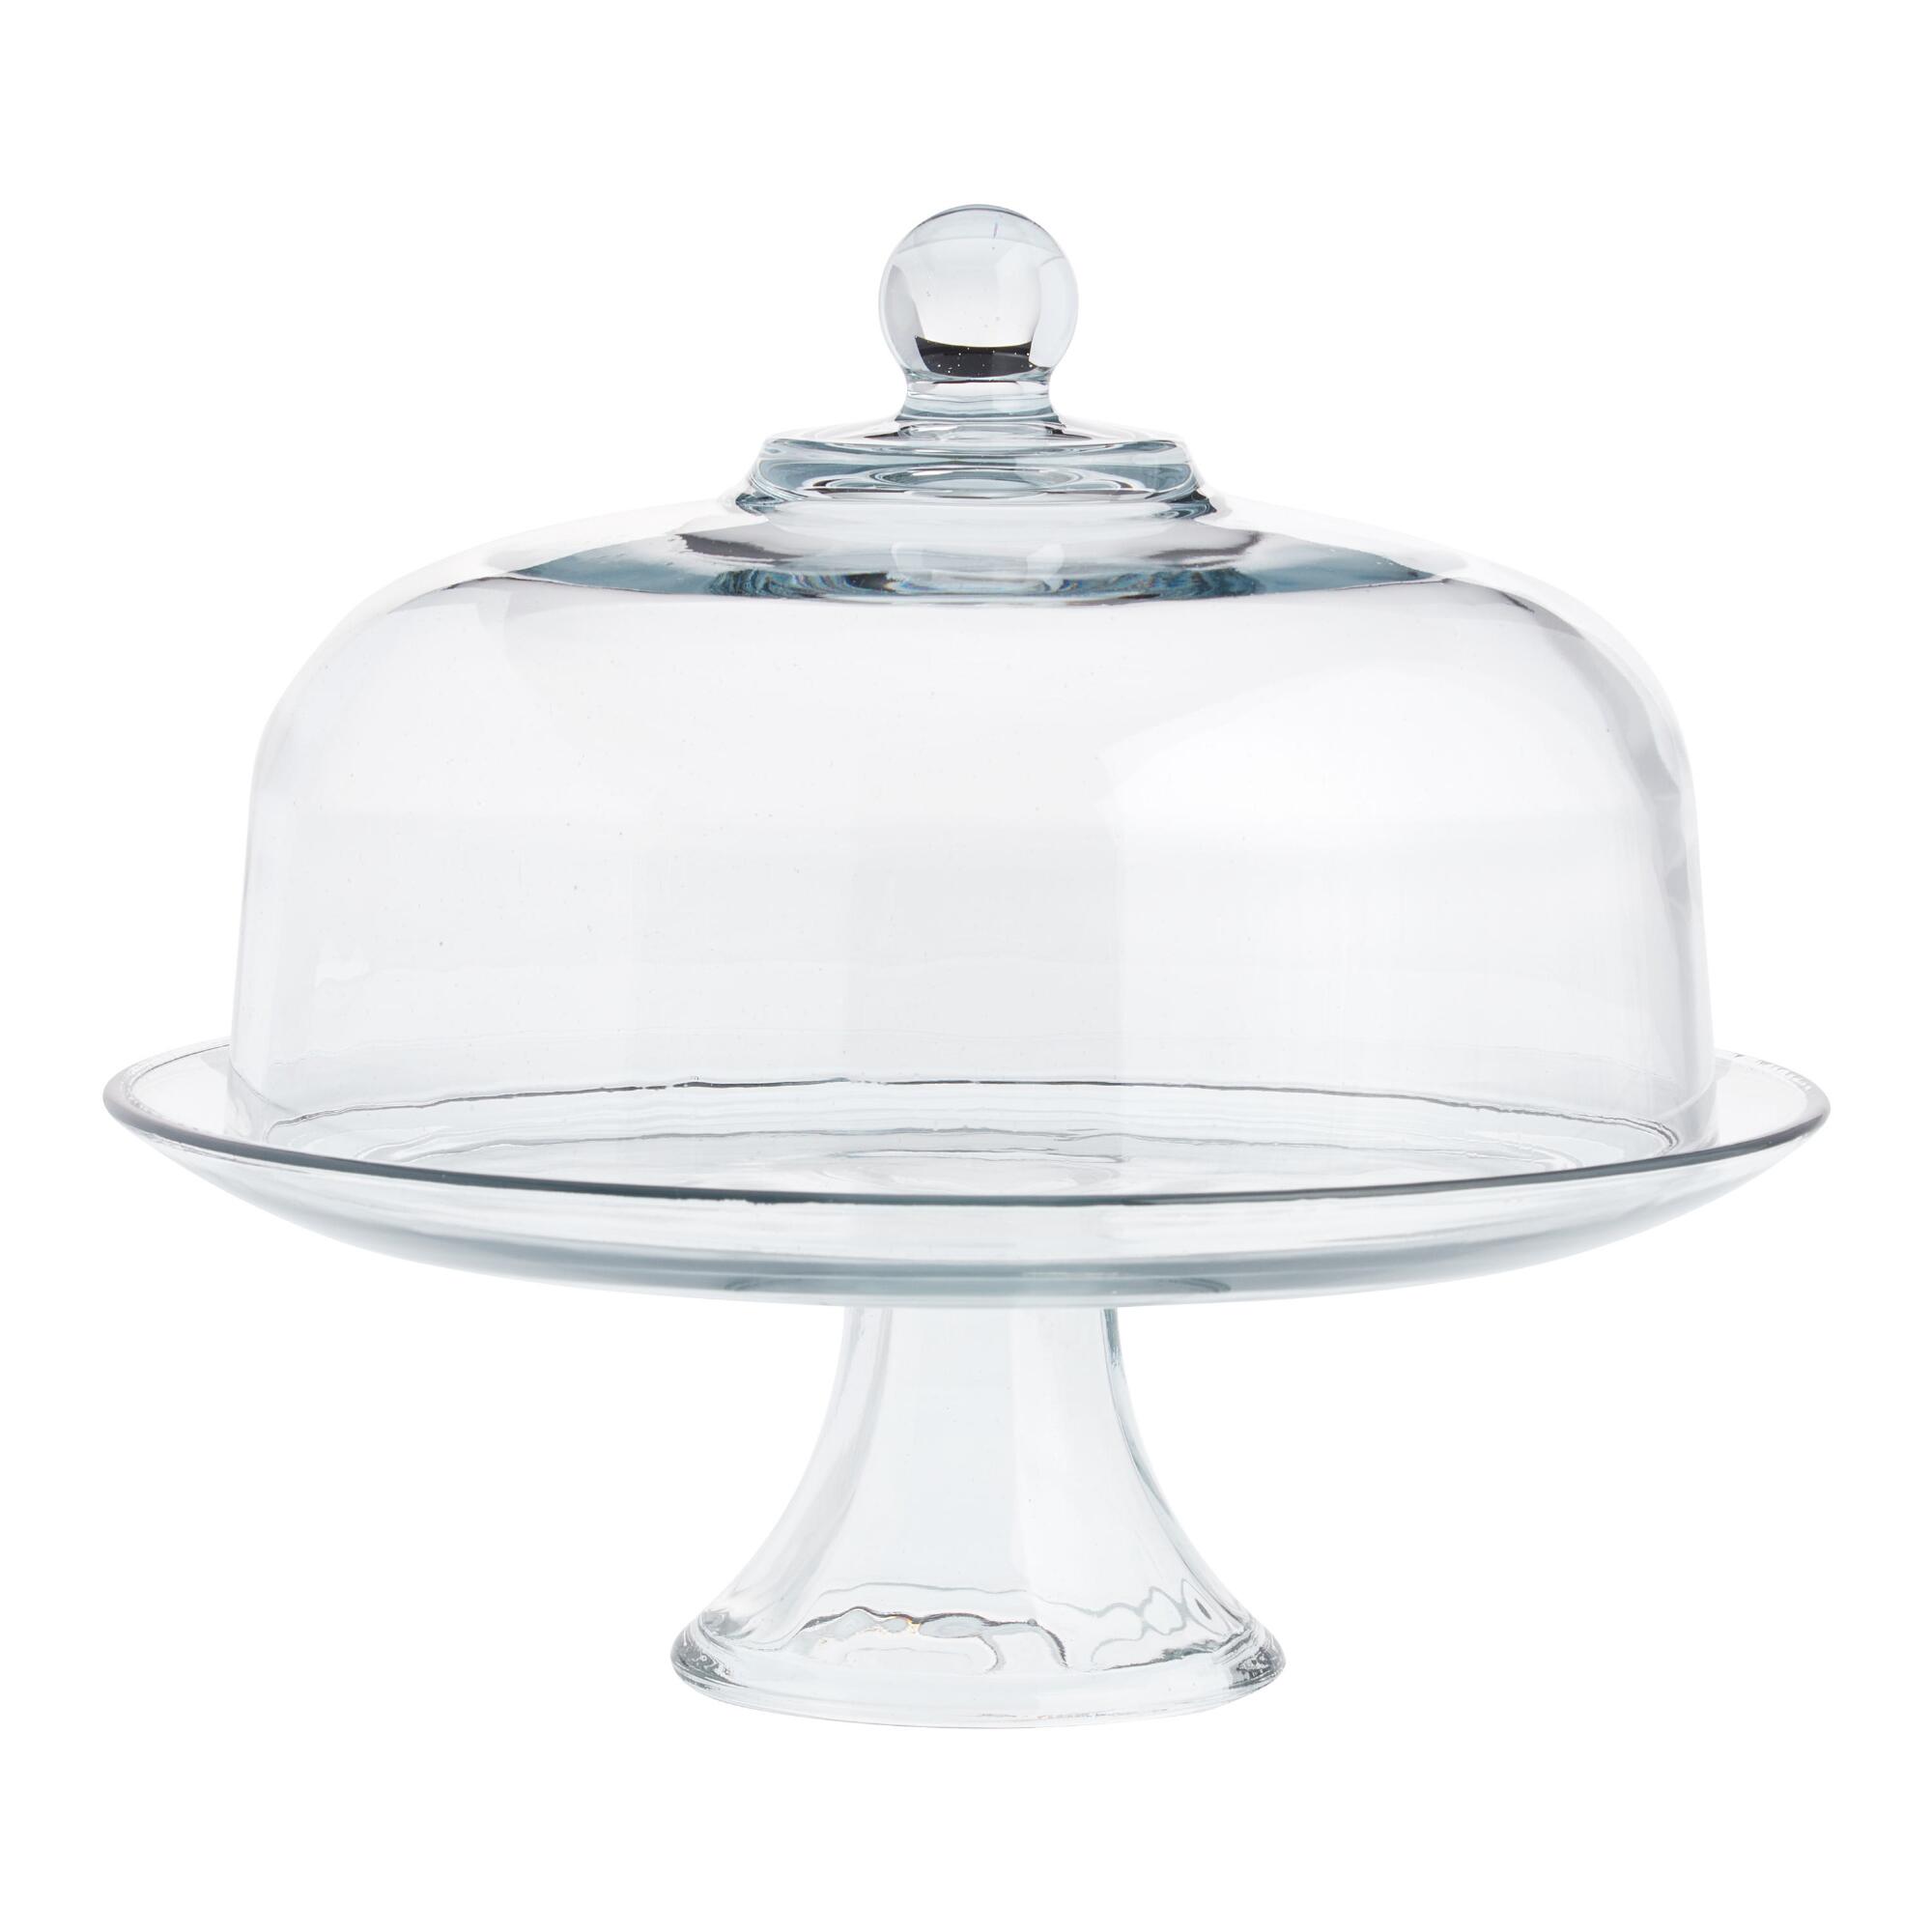 Clear Glass Cake Stand and Cloche Set by World Market